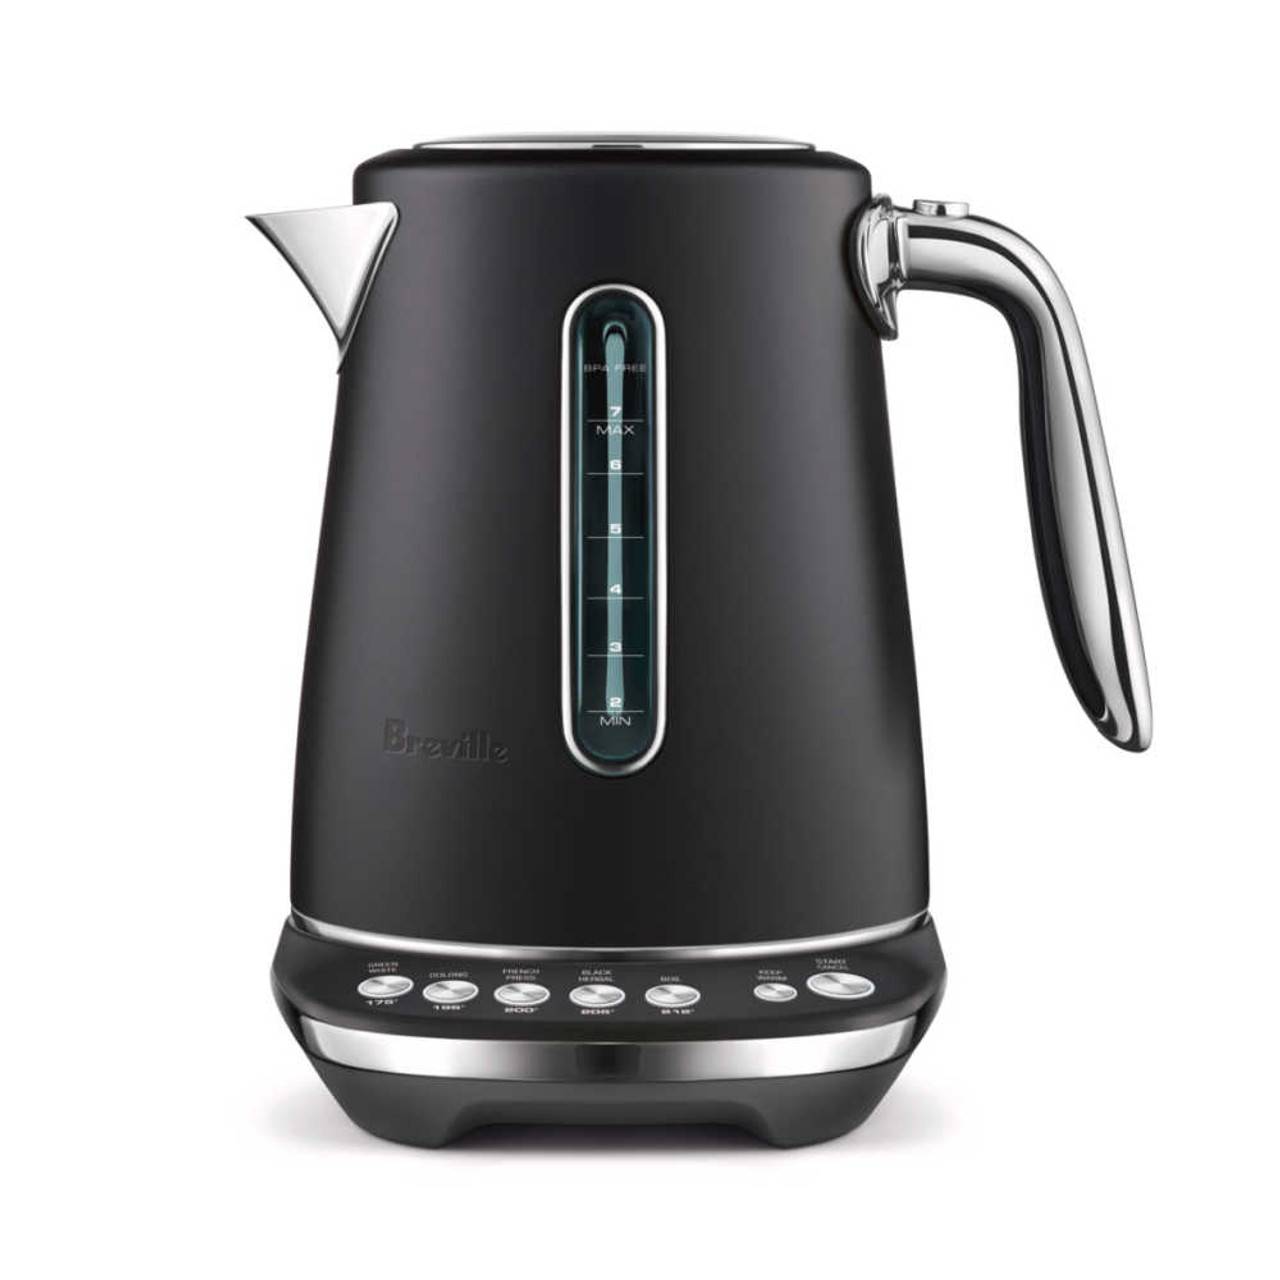 https://cdn11.bigcommerce.com/s-hccytny0od/images/stencil/1280x1280/products/2579/25129/Breville_Smart_Kettle_Luxe_in_Black_Truffle__25355.1695839077.jpg?c=2?imbypass=on